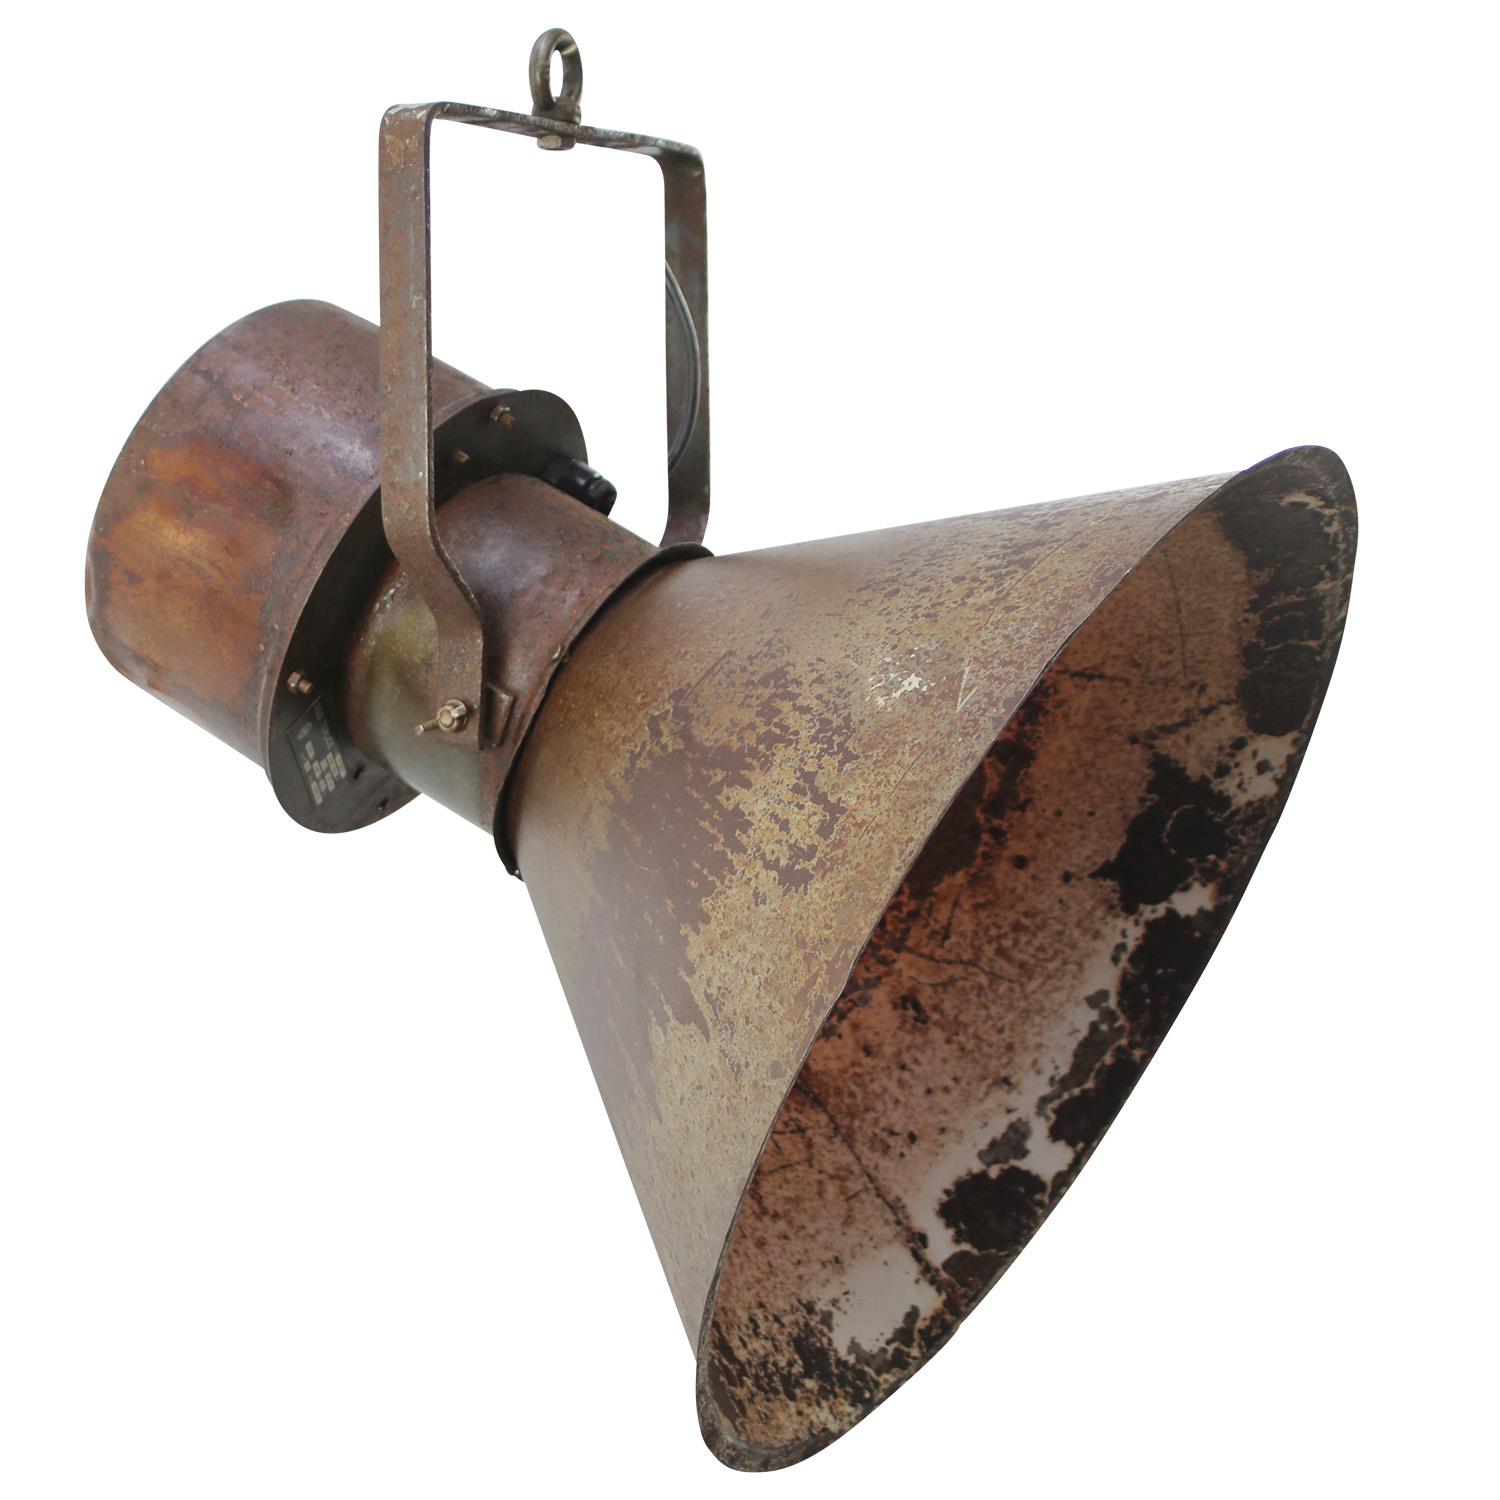 Iron, industrial pedant light, spotlight.
Rust metal with rotatable arm

Weight: 4.50 kg / 9.9 lb

Priced per individual item. All lamps have been made suitable by international standards for incandescent light bulbs, energy-efficient and LED bulbs.